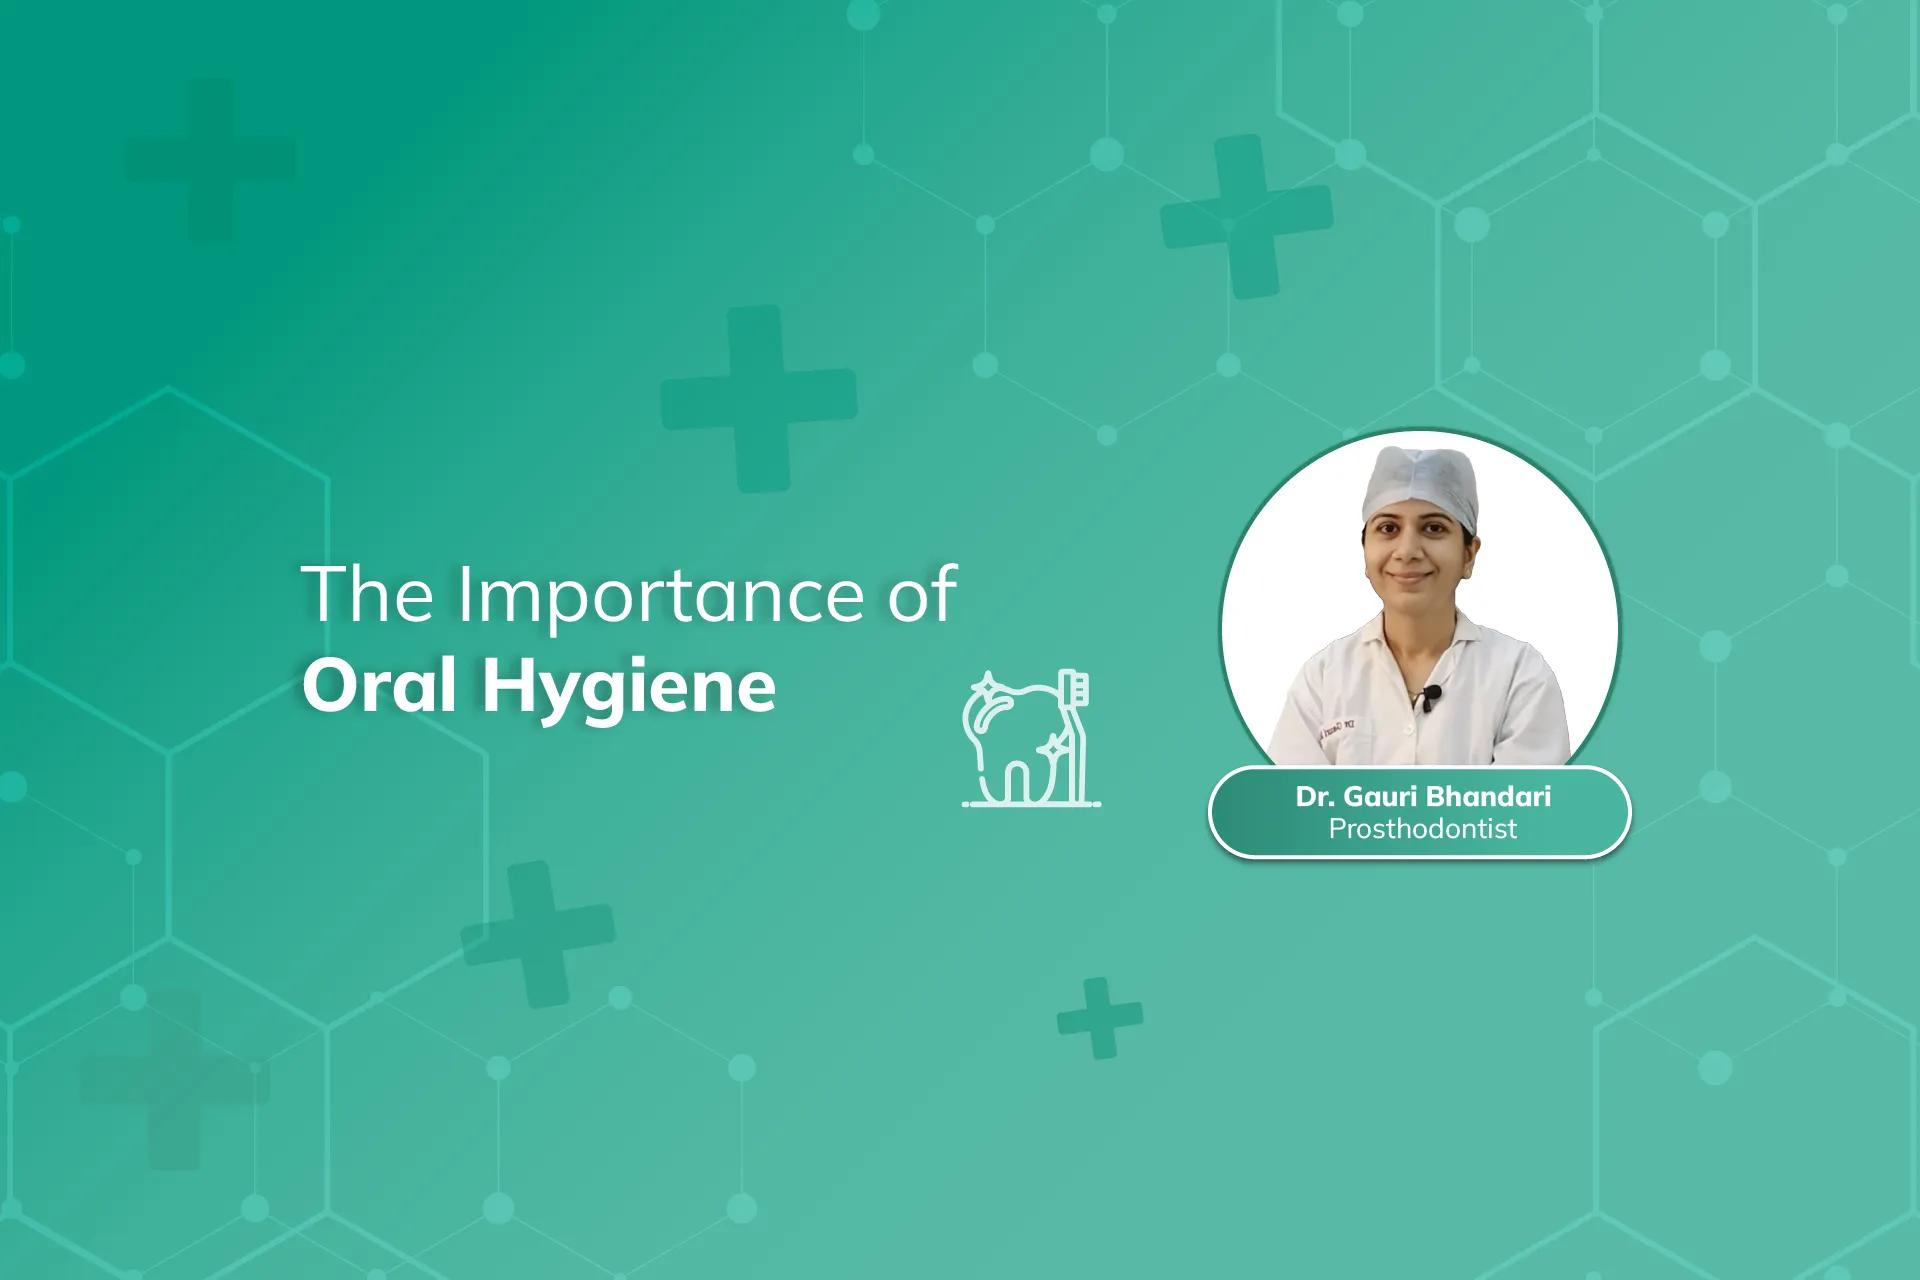 The Importance of Oral Hygiene: Quick Facts by Dr. Gauri Bhandari